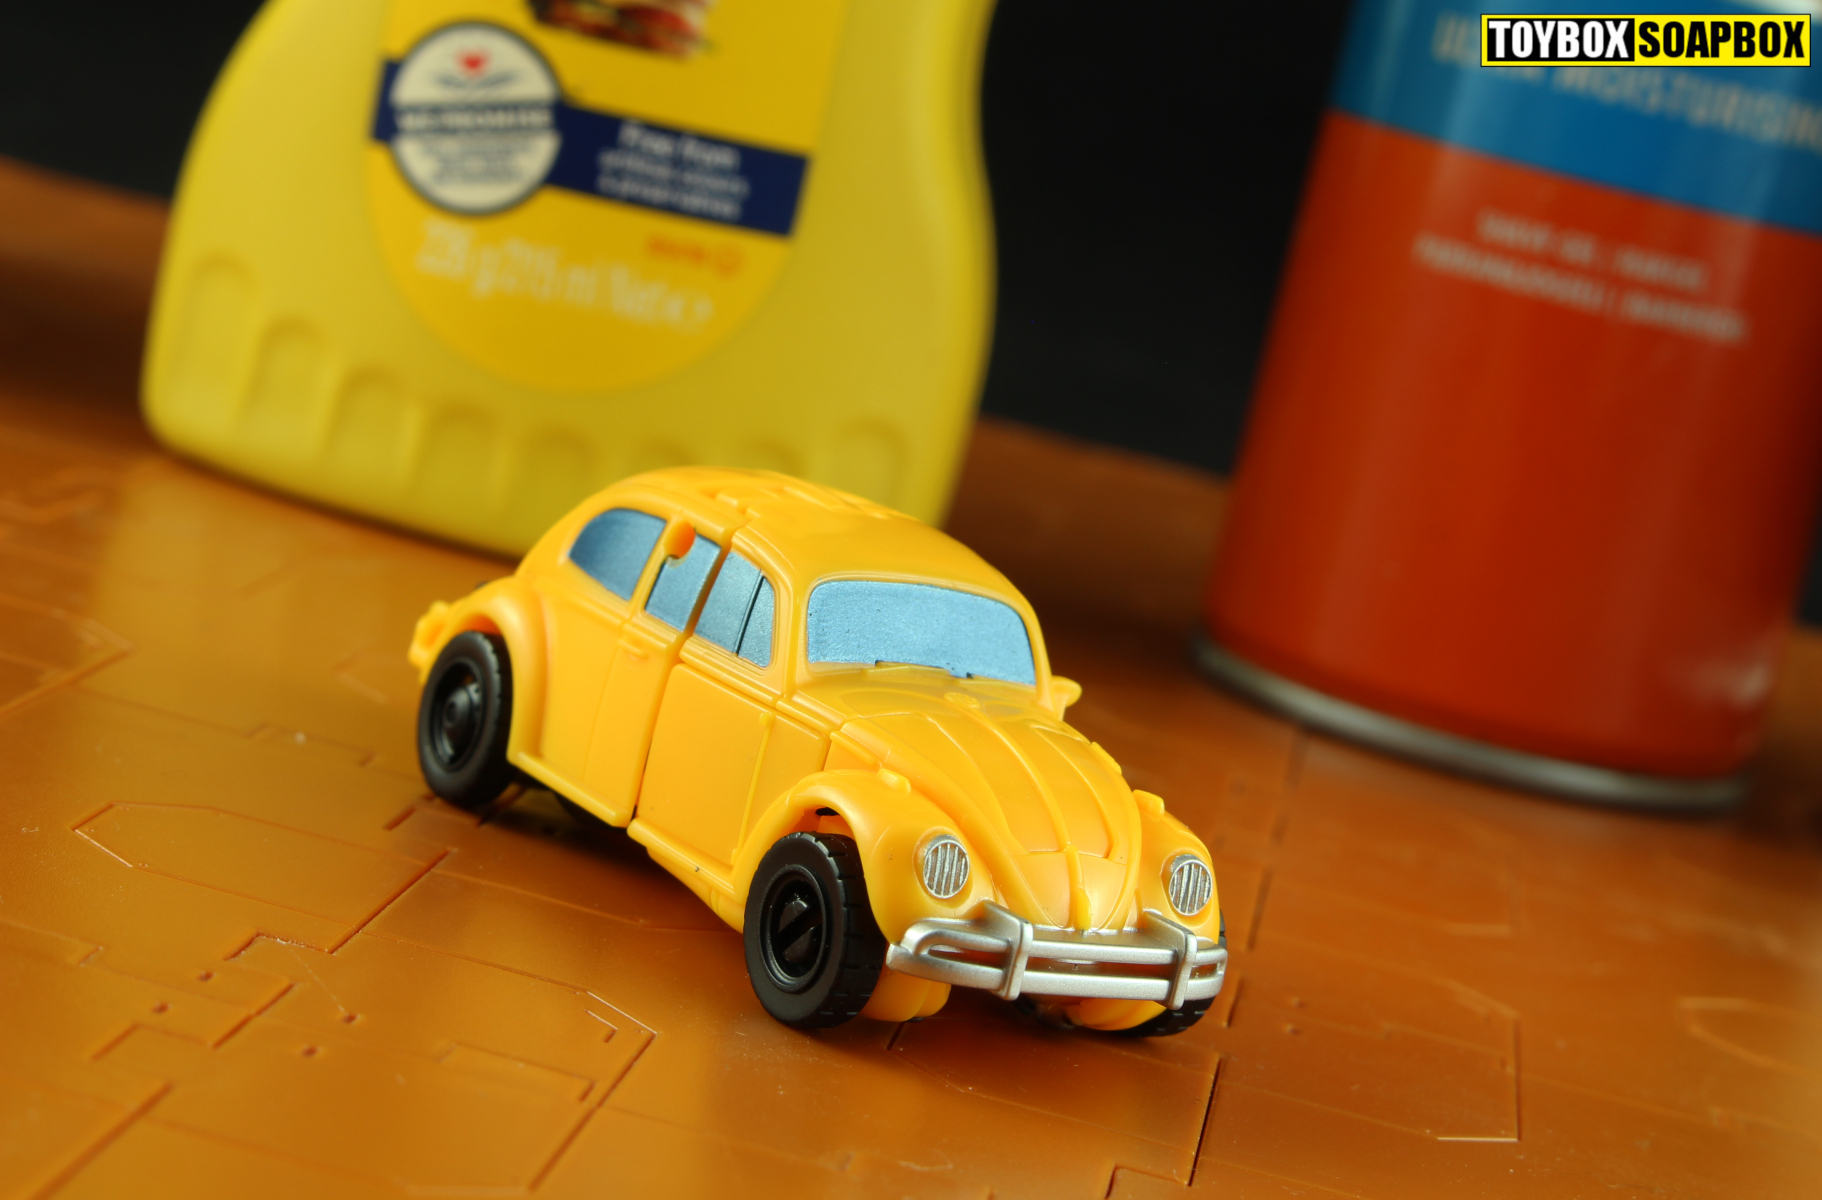 Details about   Transformers Bumblebee Energon Igniters VW Beetle NEW Free Shipping 